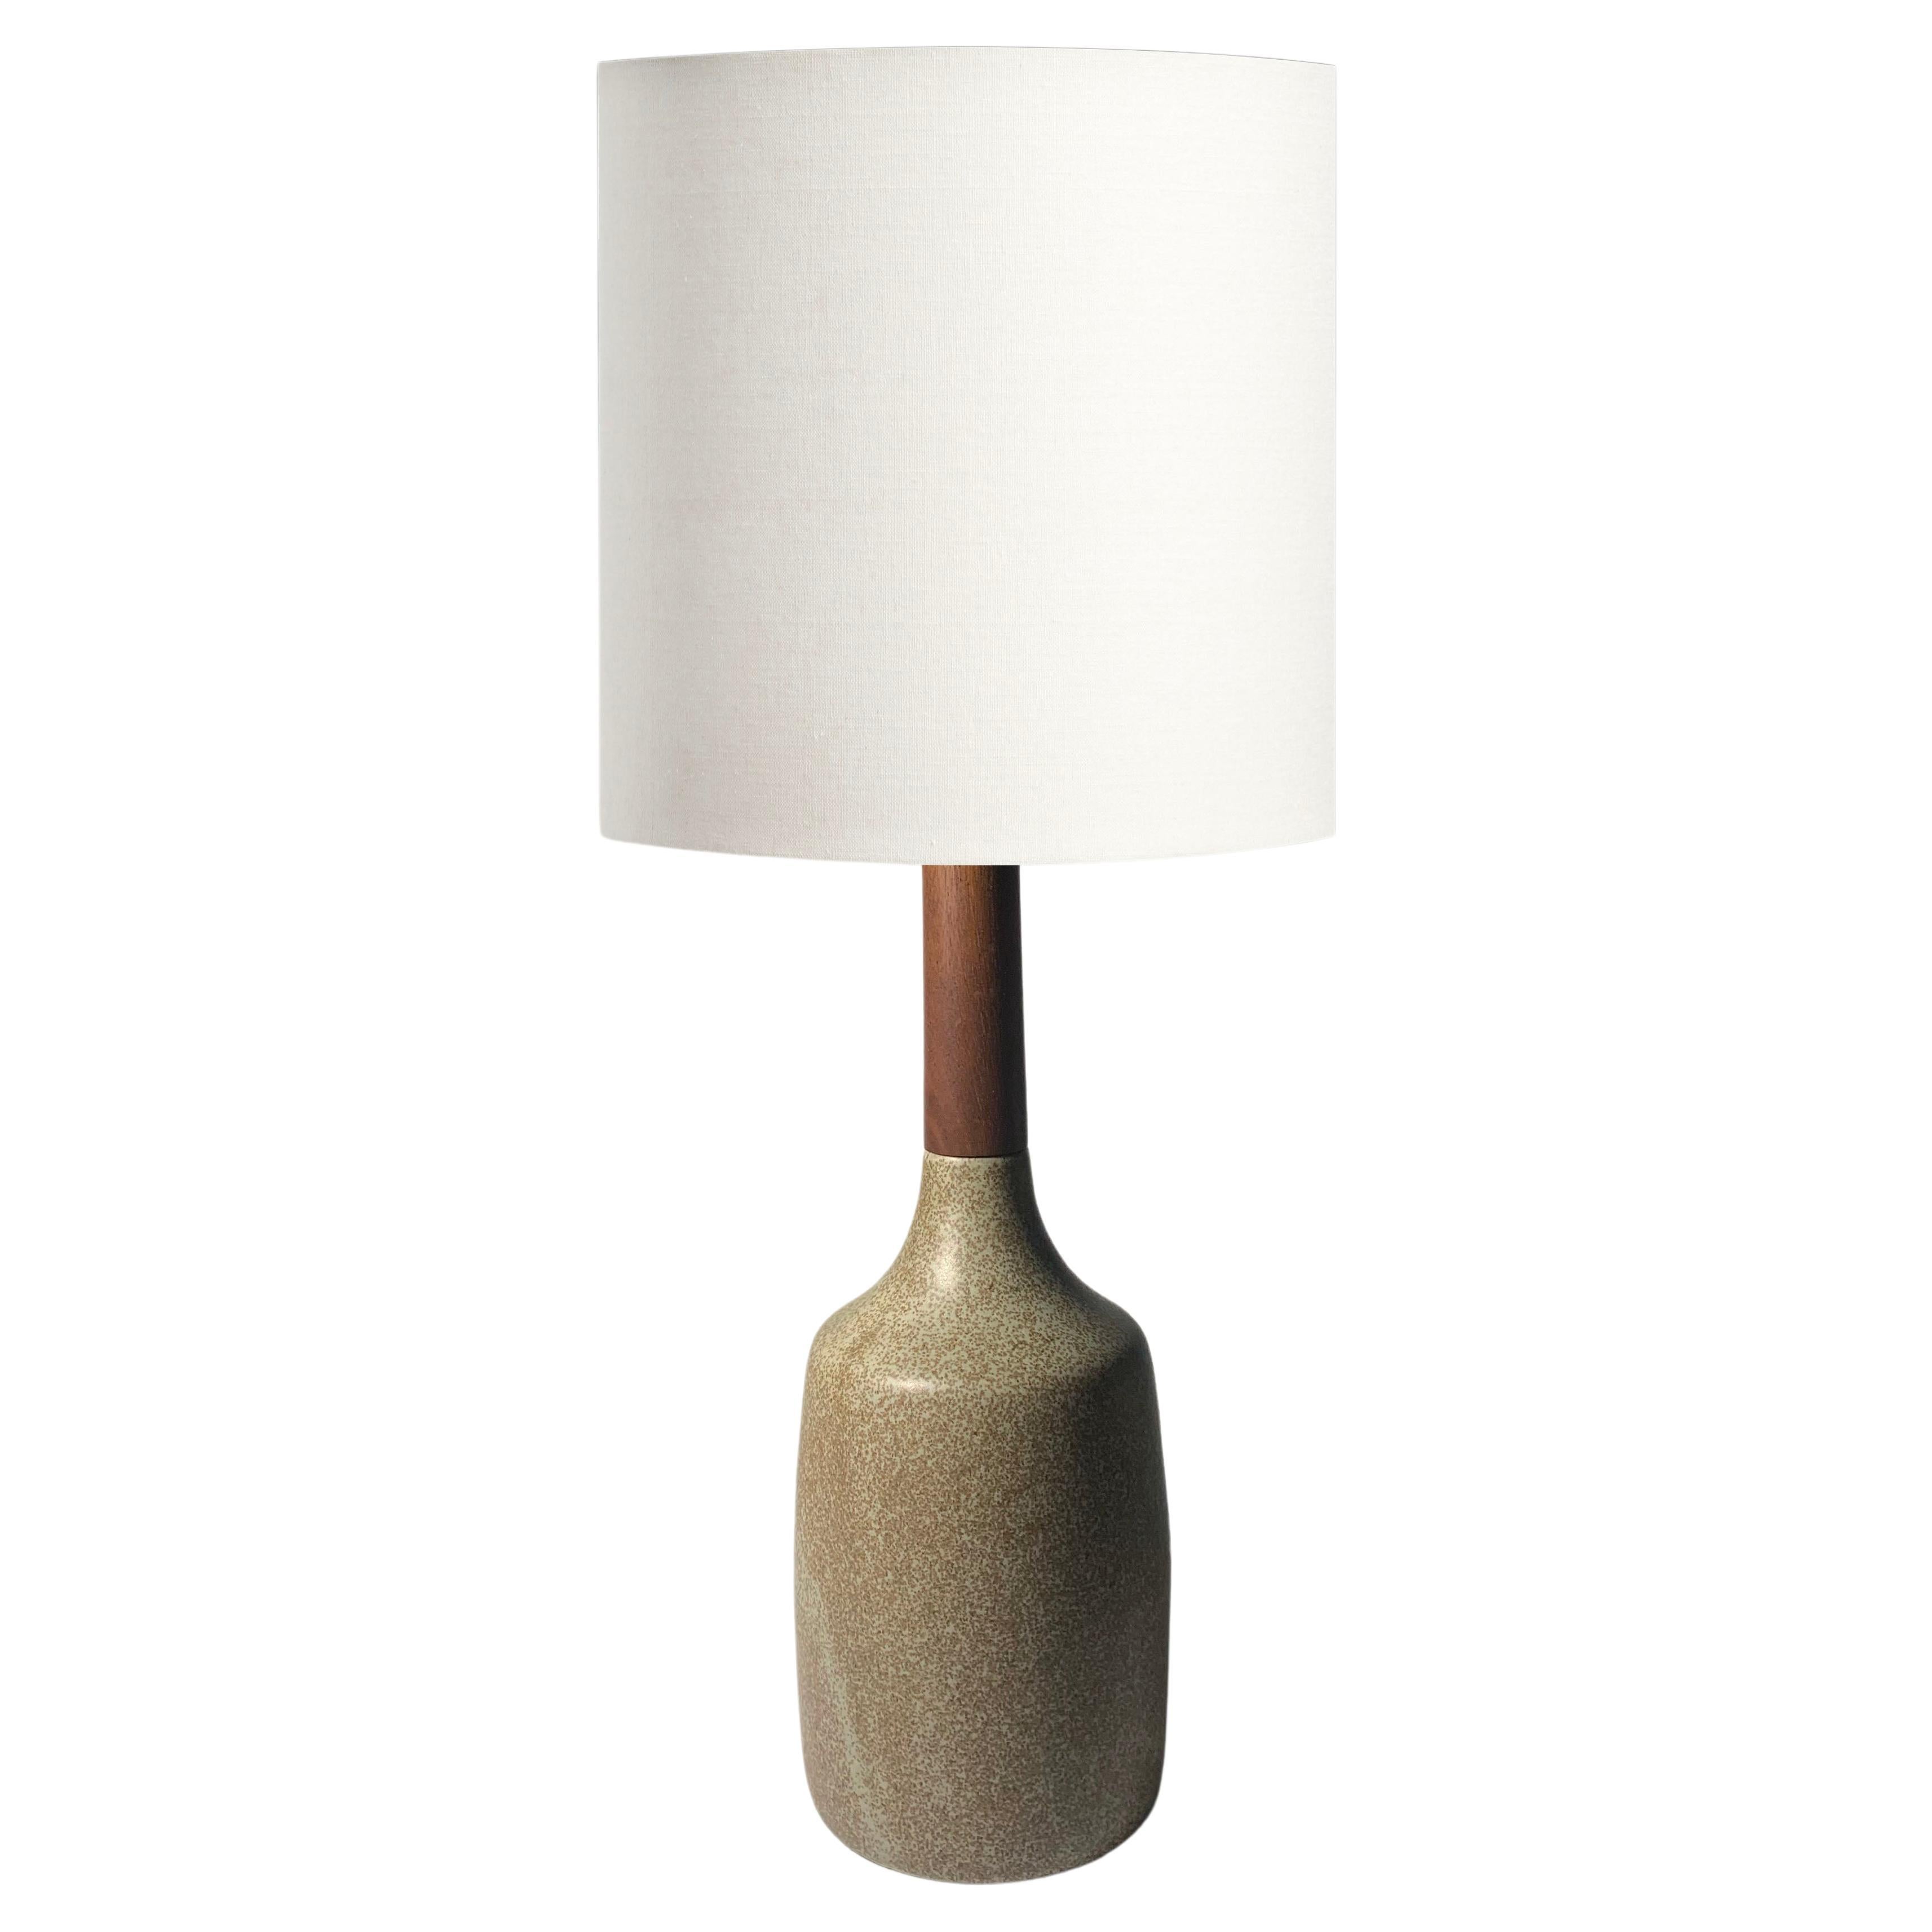 Gordon Martz Candlestick Ceramic and Wood table lamp Lamp For Sale